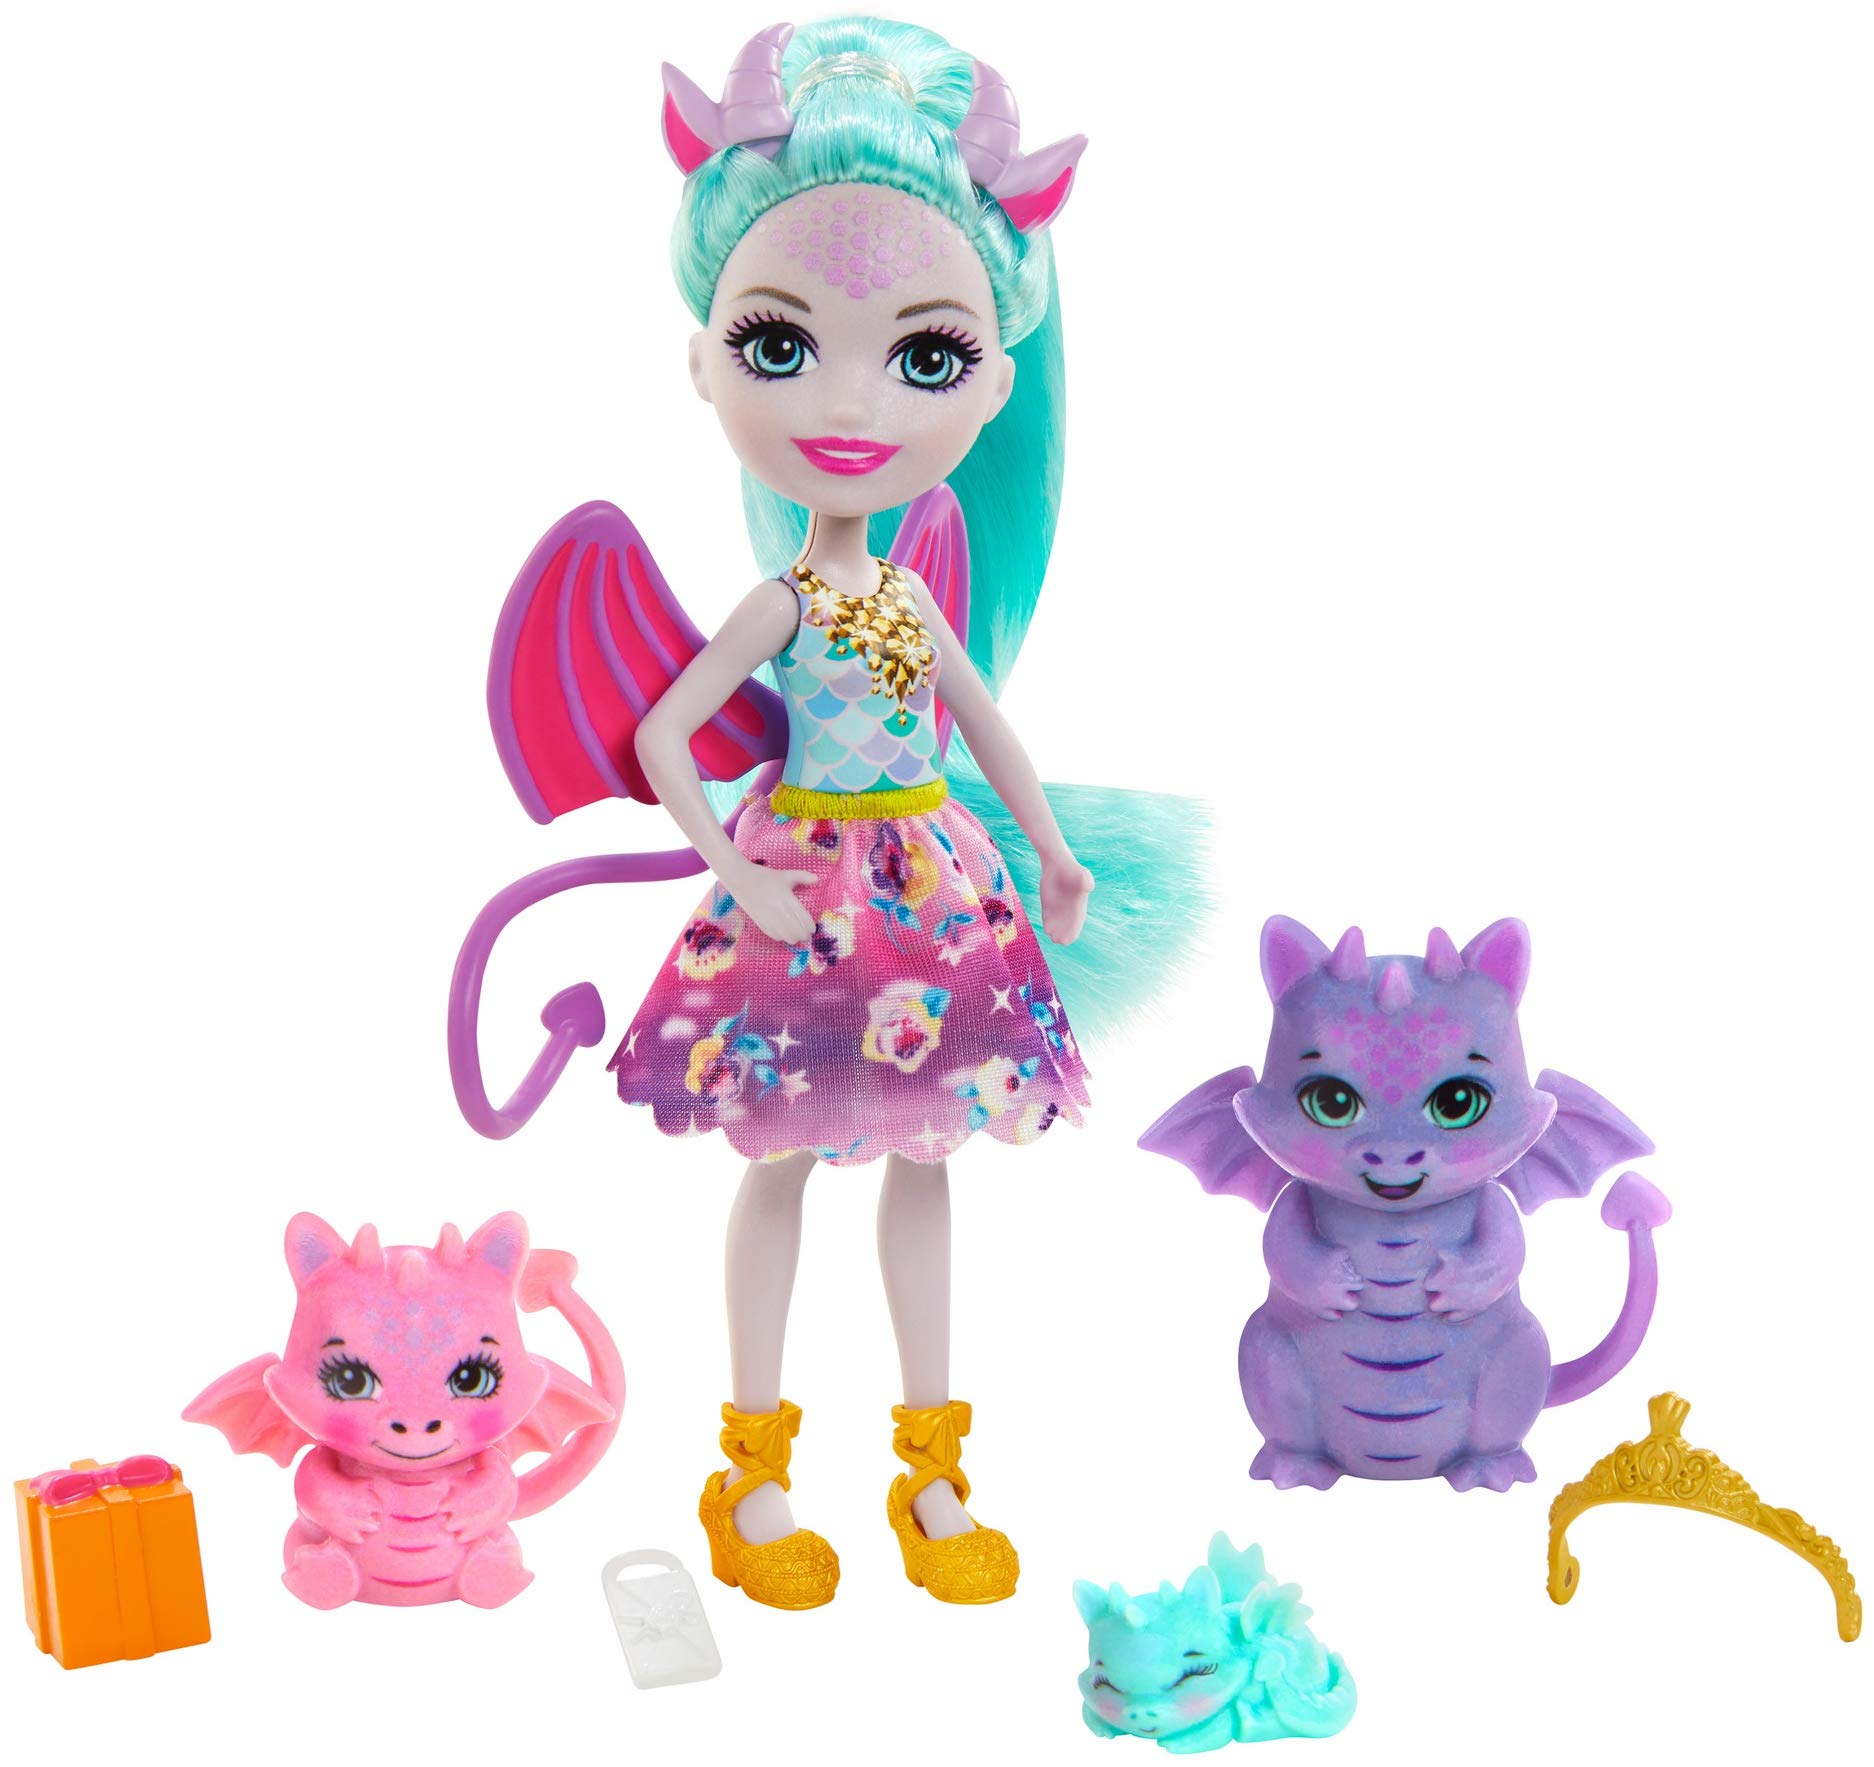 ENCHANTIMALS Royal Enchantimals Family Toy Set, Deanna Dragon Doll (6-in152-cm), 3 Dragon Figures and 4 Accessories, great gift for 3-8 Year 